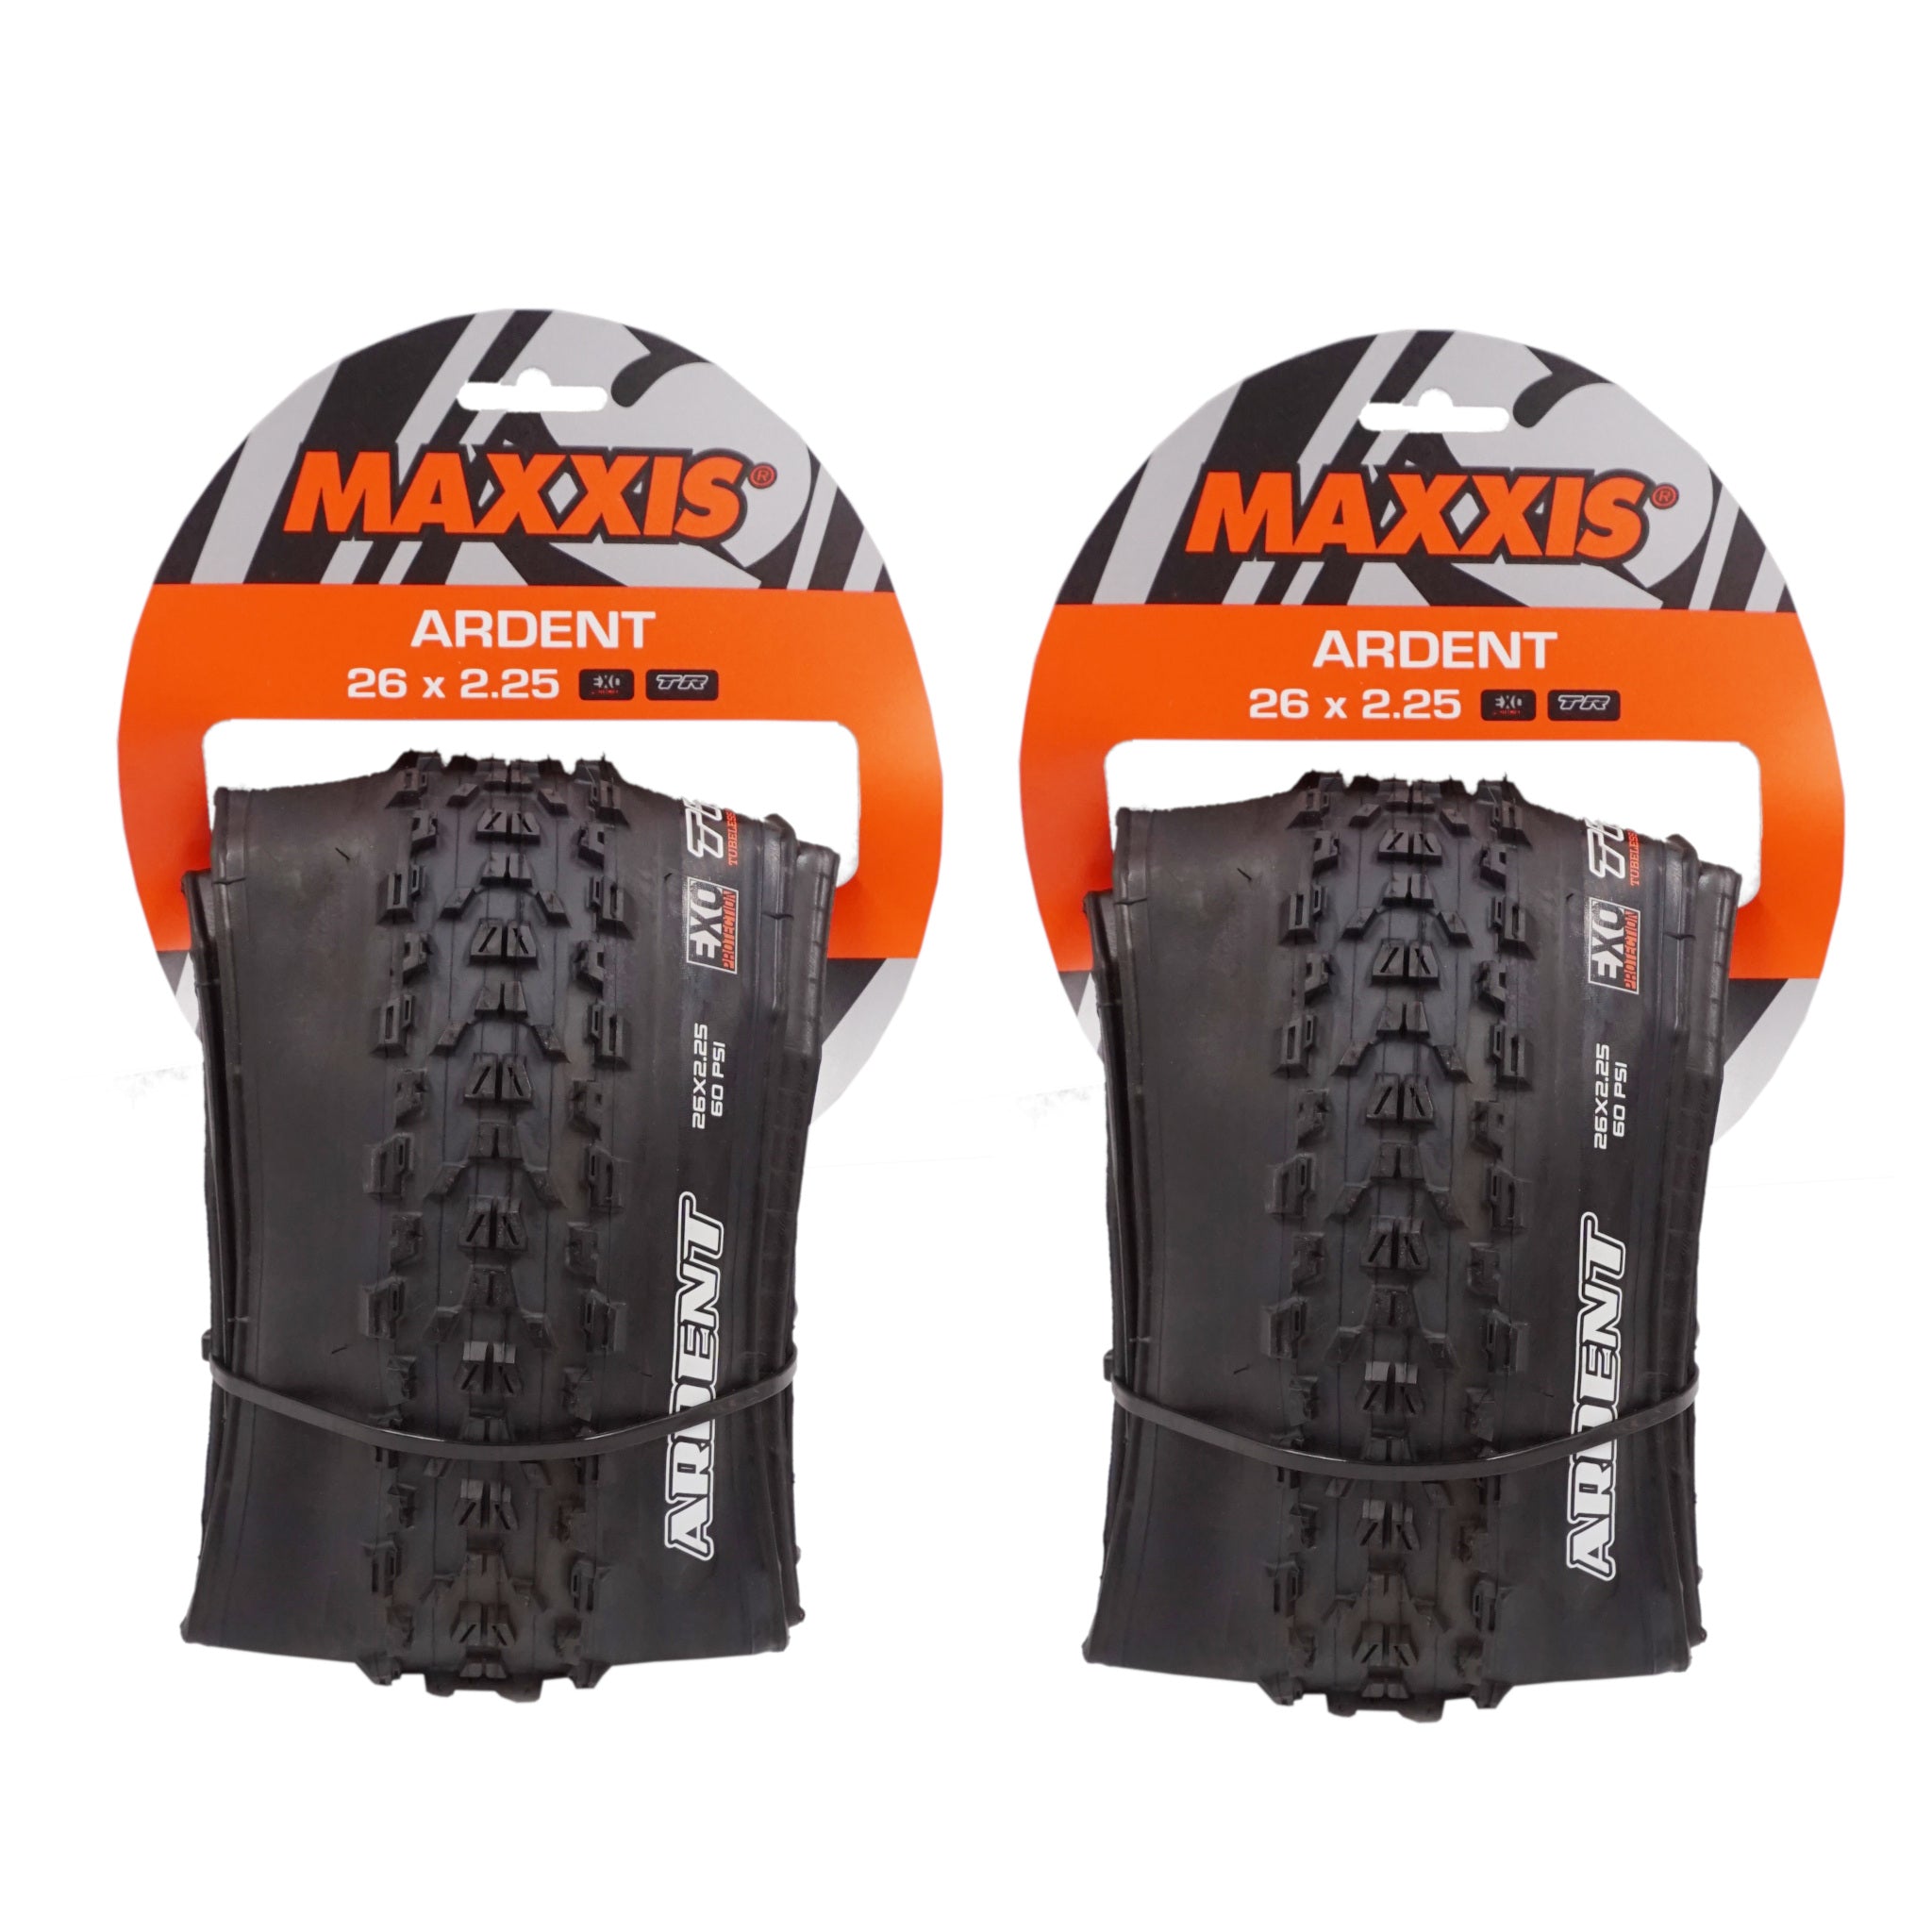 Maxxis Ardent 26-inch EXO Dual Compound Tubeless Ready Folding Tire